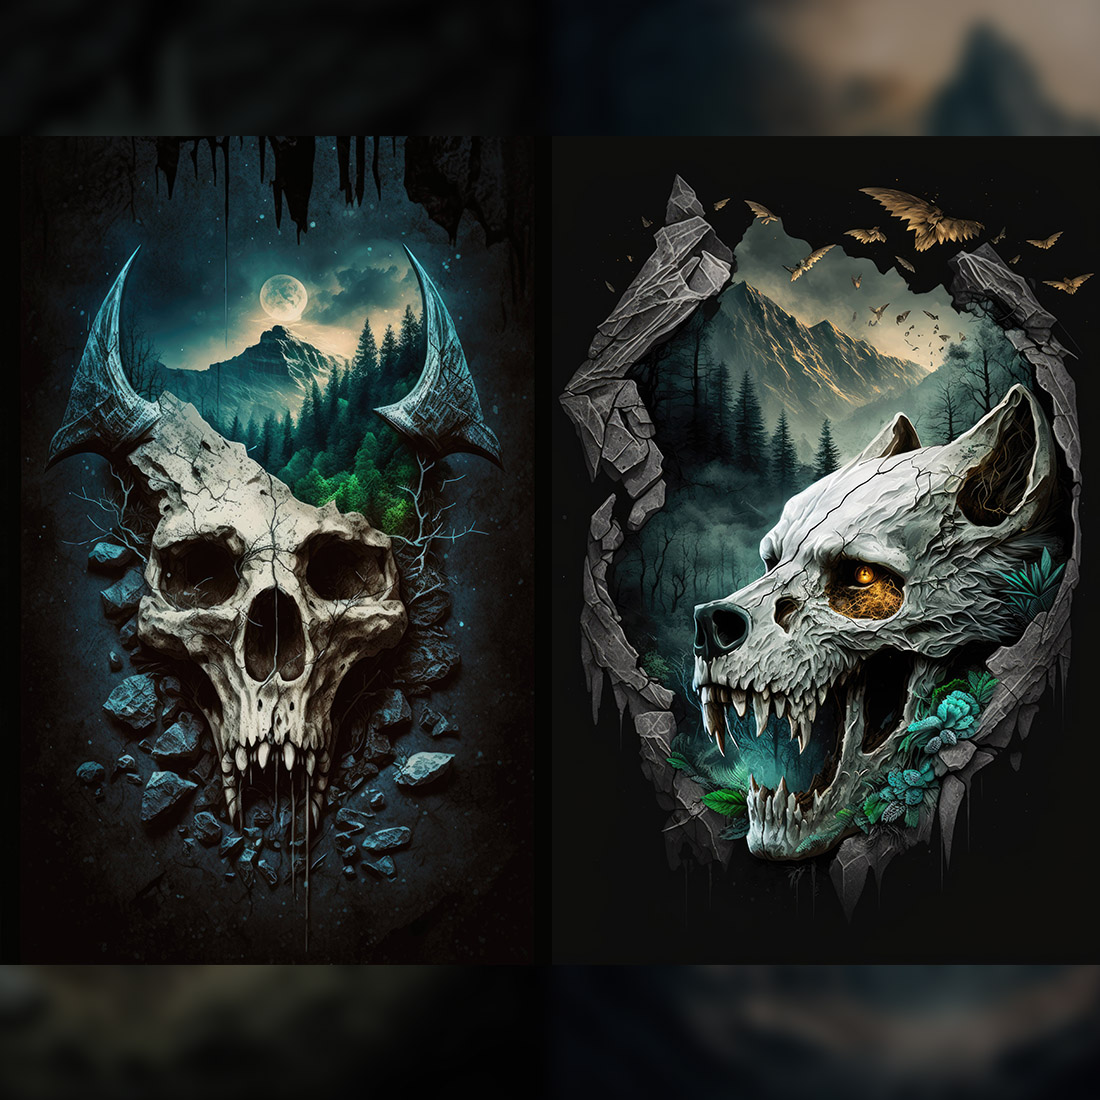 Fantasy skull in the middle preview image.